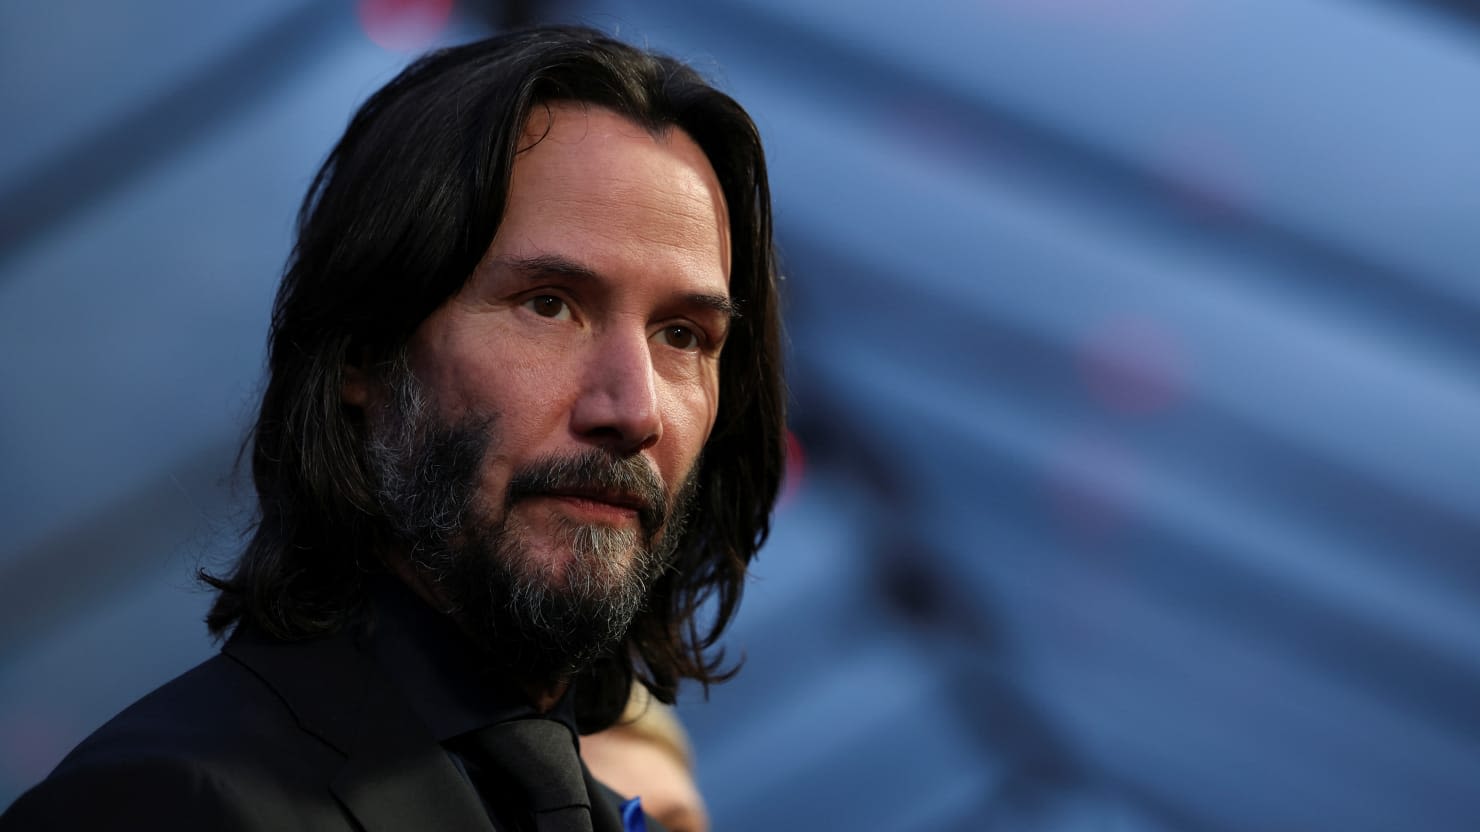 Keanu Reeves Has Written a Sci-Fi Novel and the Plot Is Wild